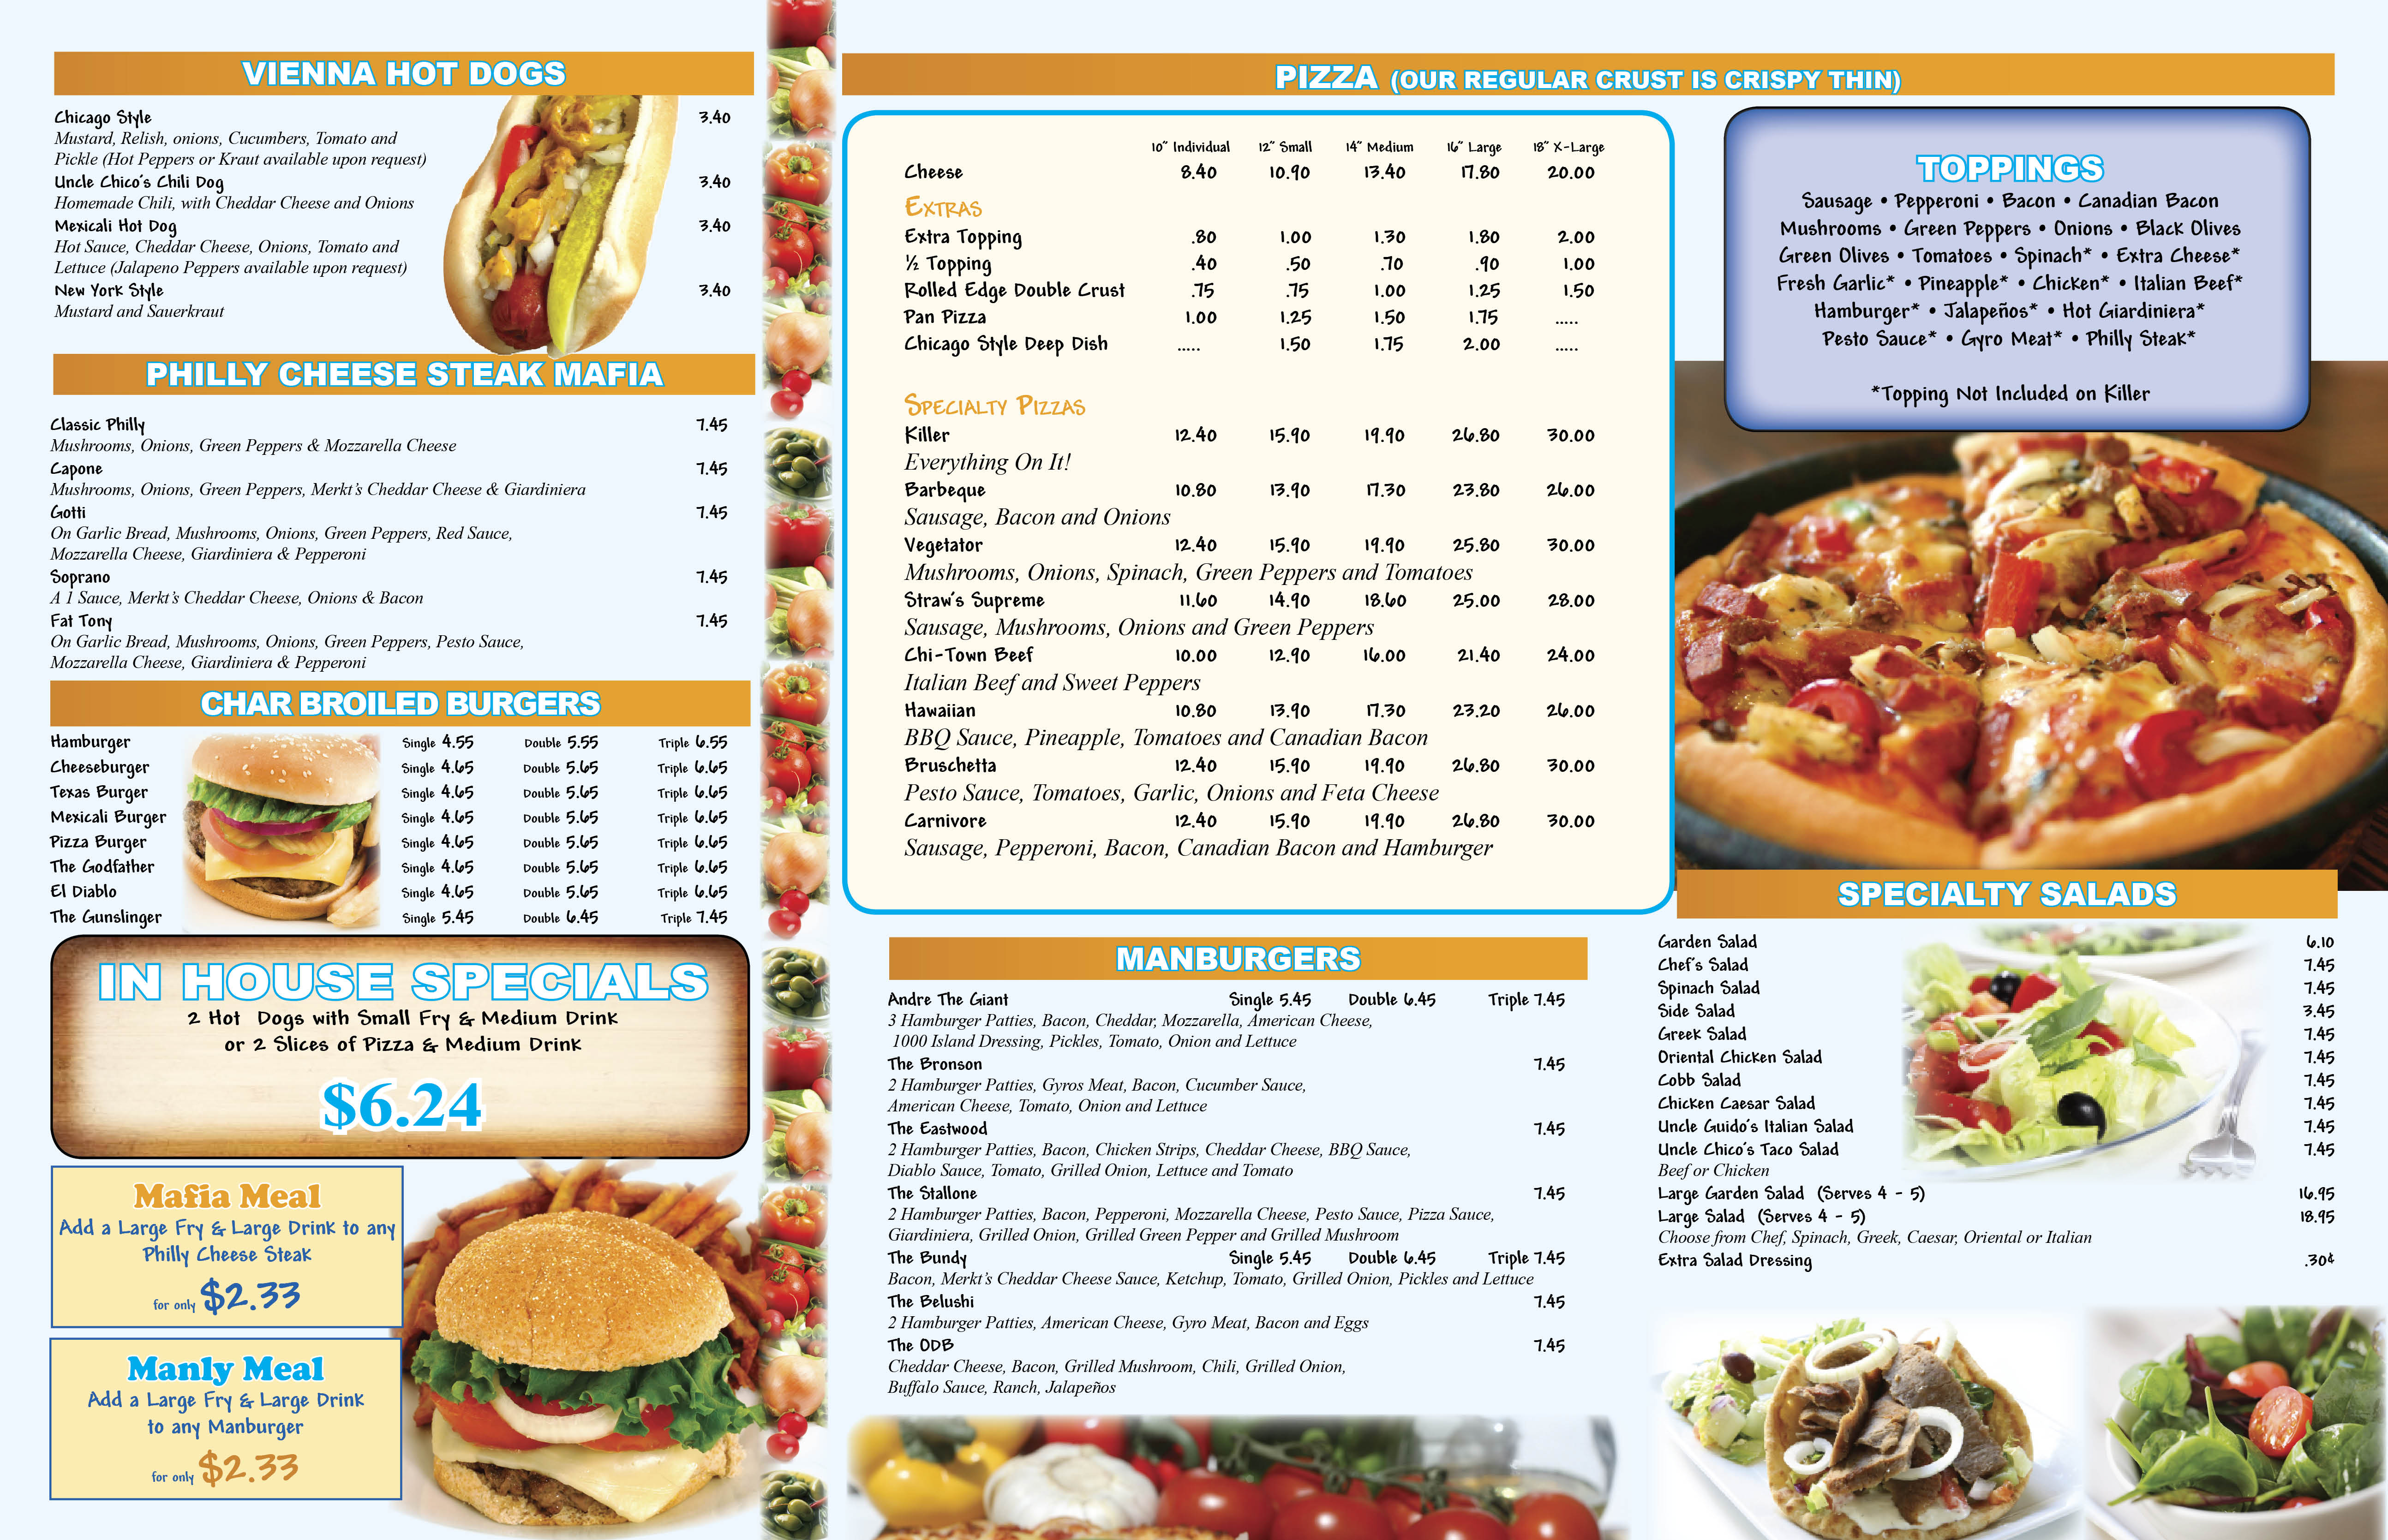 pizza, pizzeria, menu, menus, coupon, coupons, wheaton, winfield, glen ellyn, carol stream, glendale heights, lombard, lisle, warrenville, 60187, 60189, 60137, 60139, 60148, 60555, 60190, jack straw's, jack straws, rosatis, rosati's, nancys, nancy's, capri, bacci, barones, barone's, pizza hut, little ceasars, little ceasar's, papa johns, papa john's, dominos, domino's, pal joey's, pal joeys, addantes, addante's, jimmy johns, jimmy john's, chineese food, mexican food, fast food, carry out, drive thu, deliver